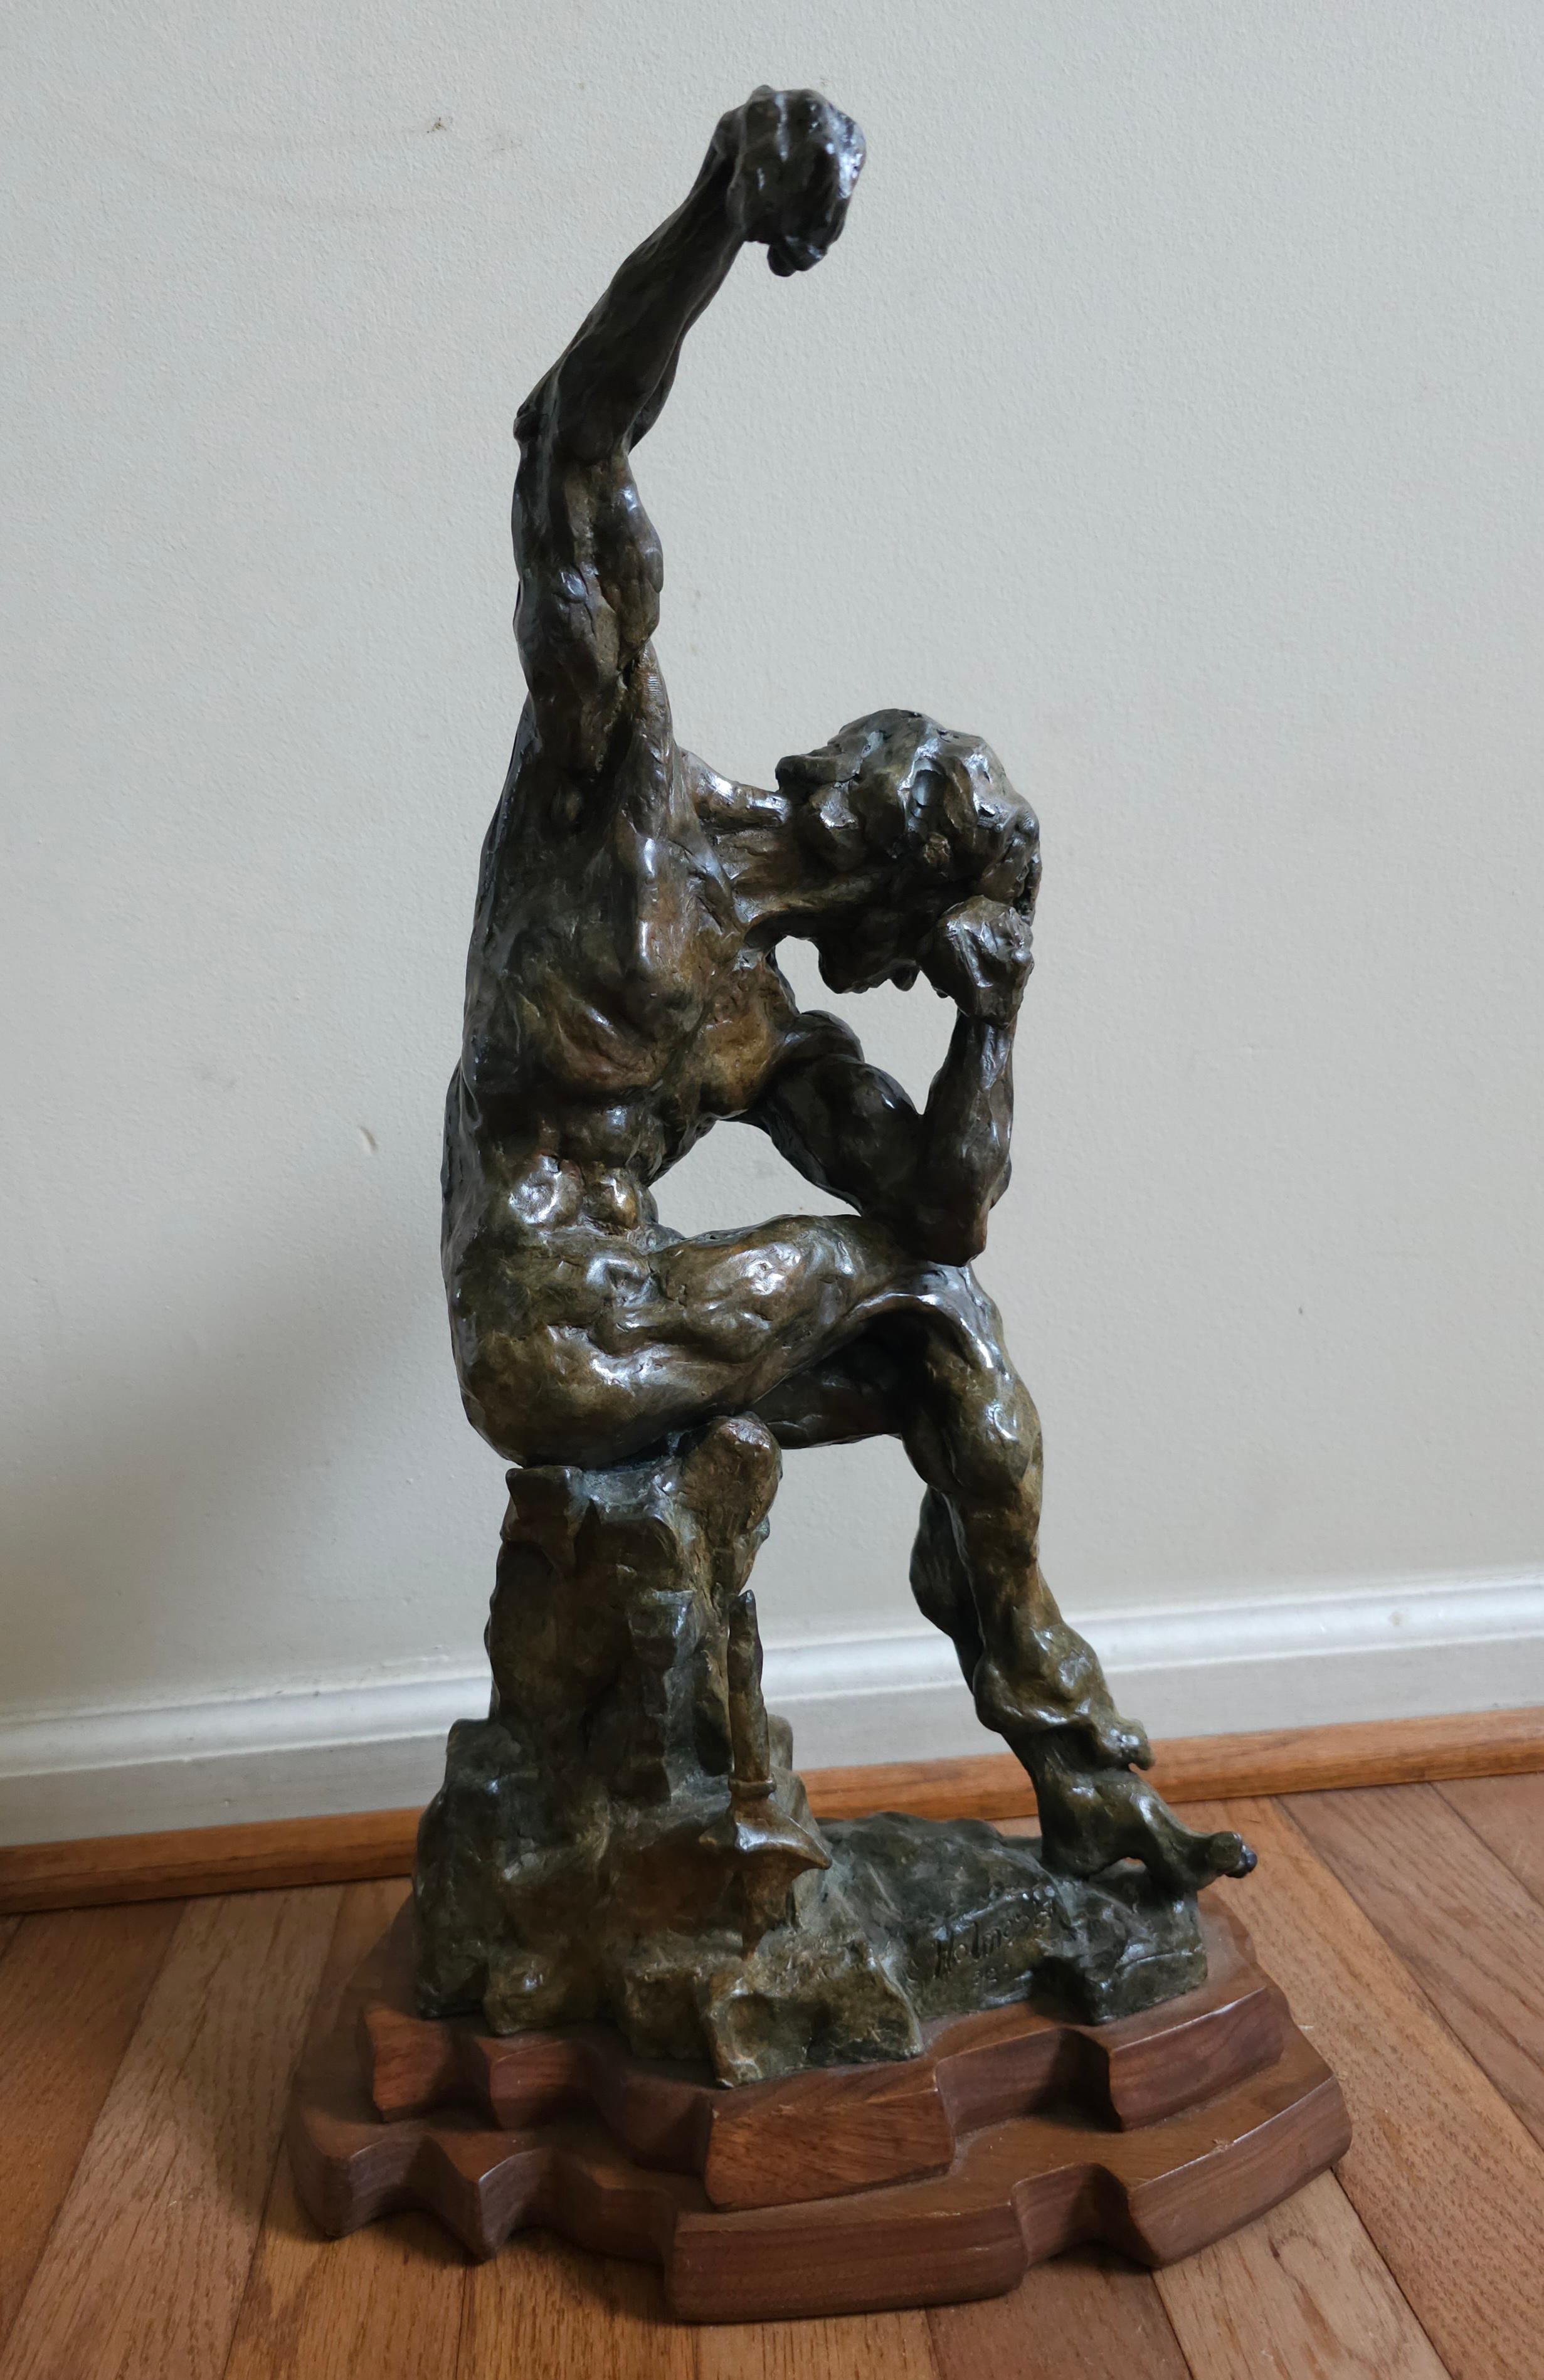 Tim Holmes (American b. 1955), The Victorious Gladiator, Brutalist Bronze on Wood plinth, Signed © Holmes and numbered 5/20 on base. Measures 9